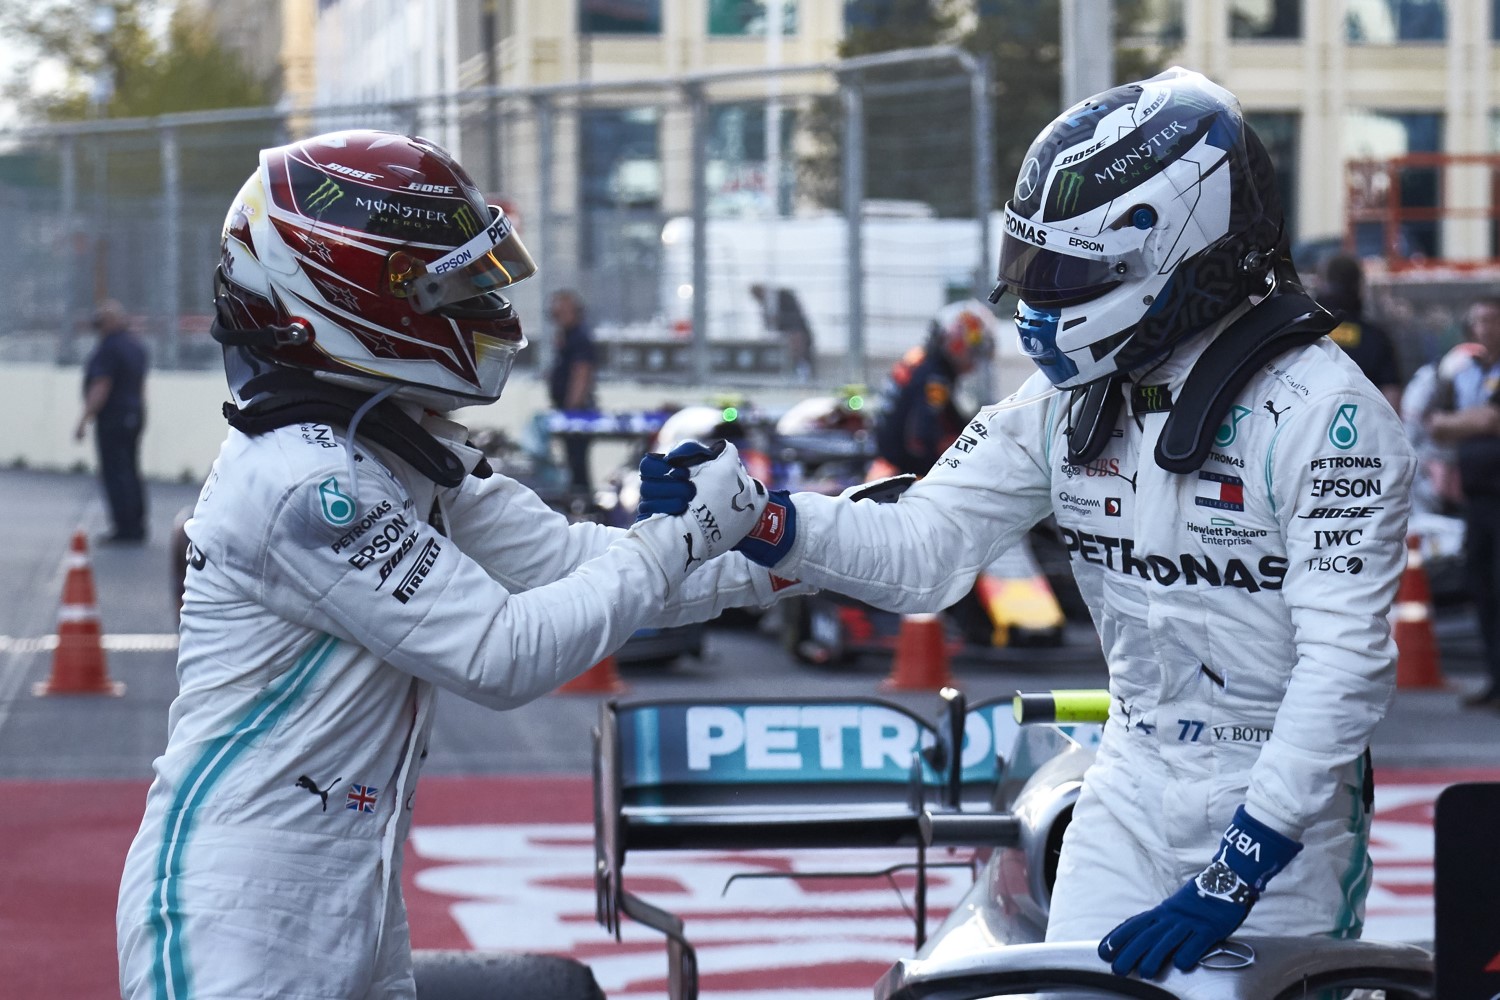 Hamilton and Bottas - they won't be shaking hands for long if Bottas stays in point lead